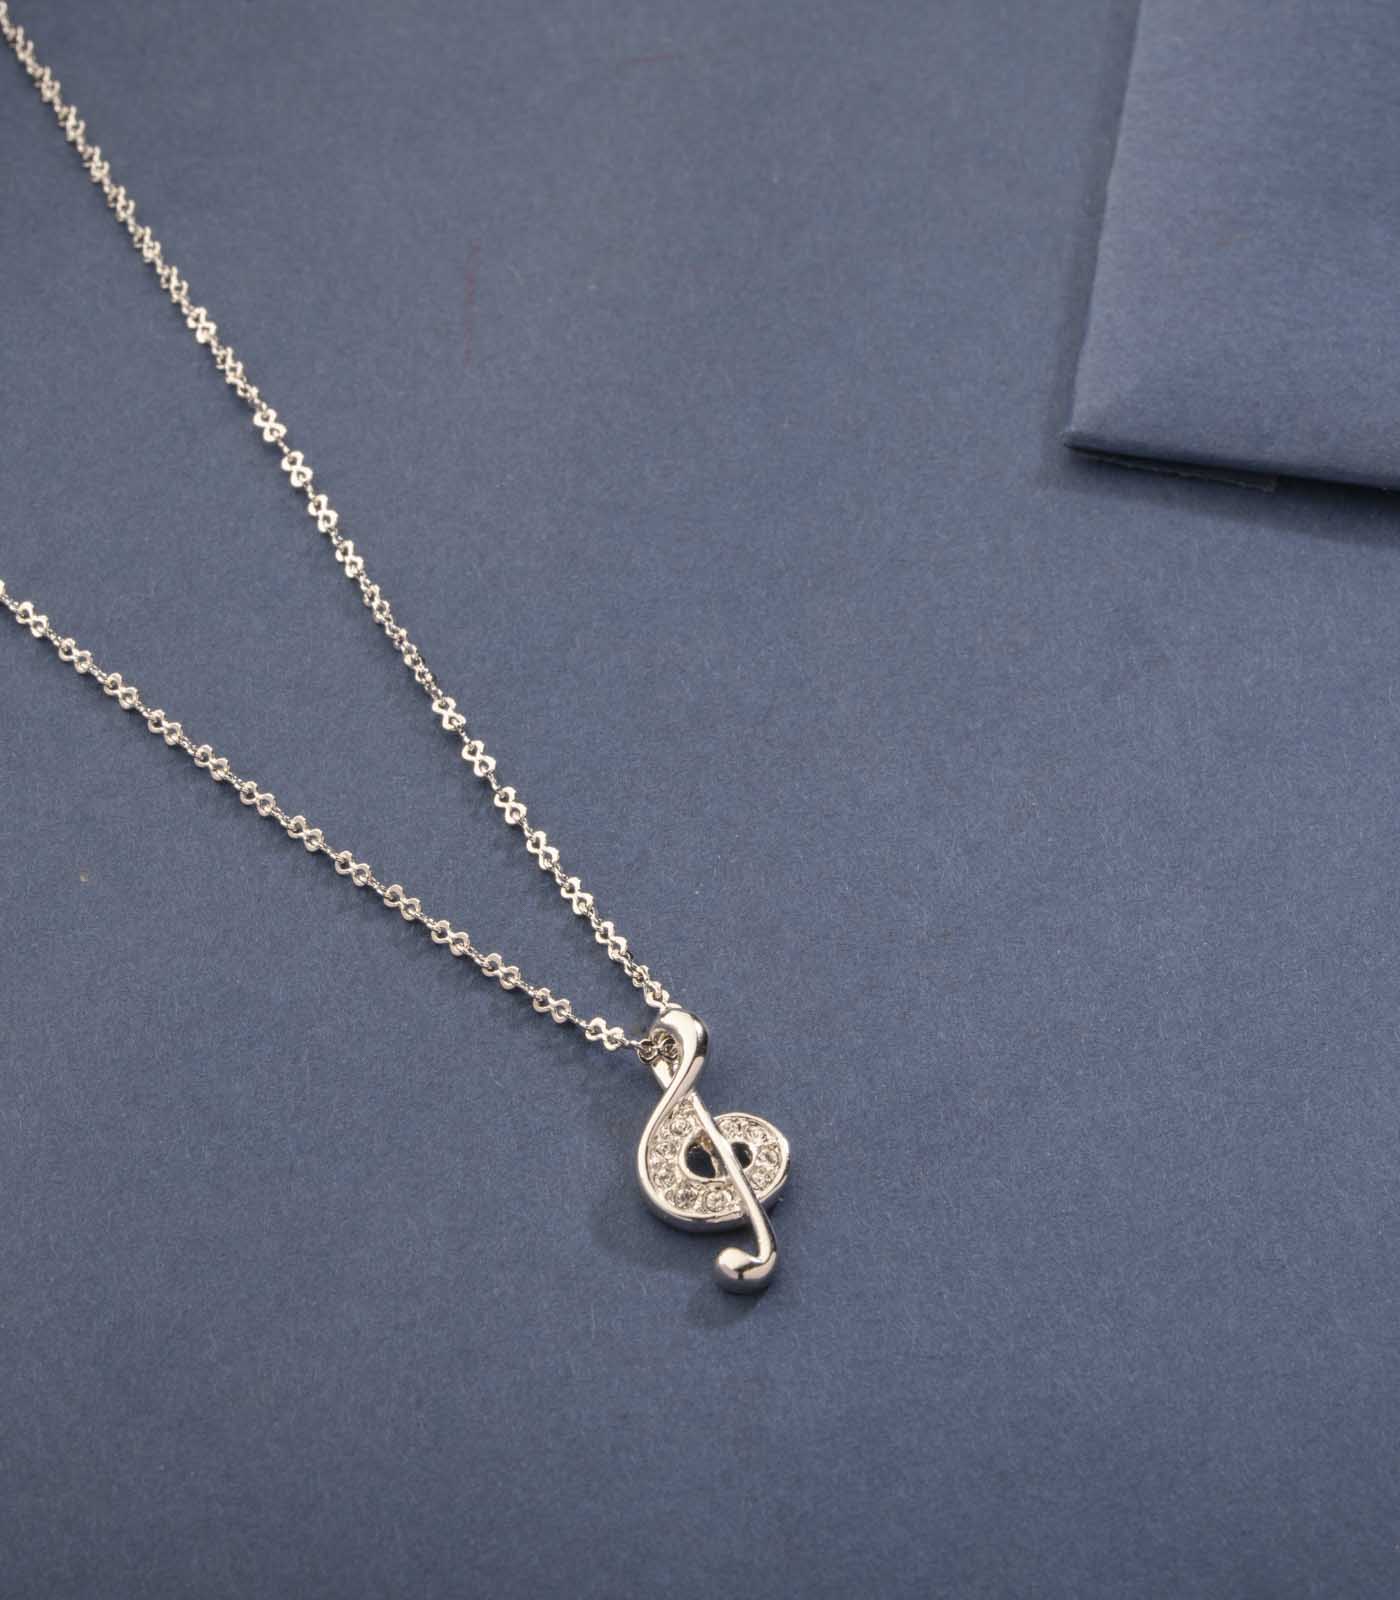 Fancy Silver Pendant Of Musical Notes Necklace (Brass)